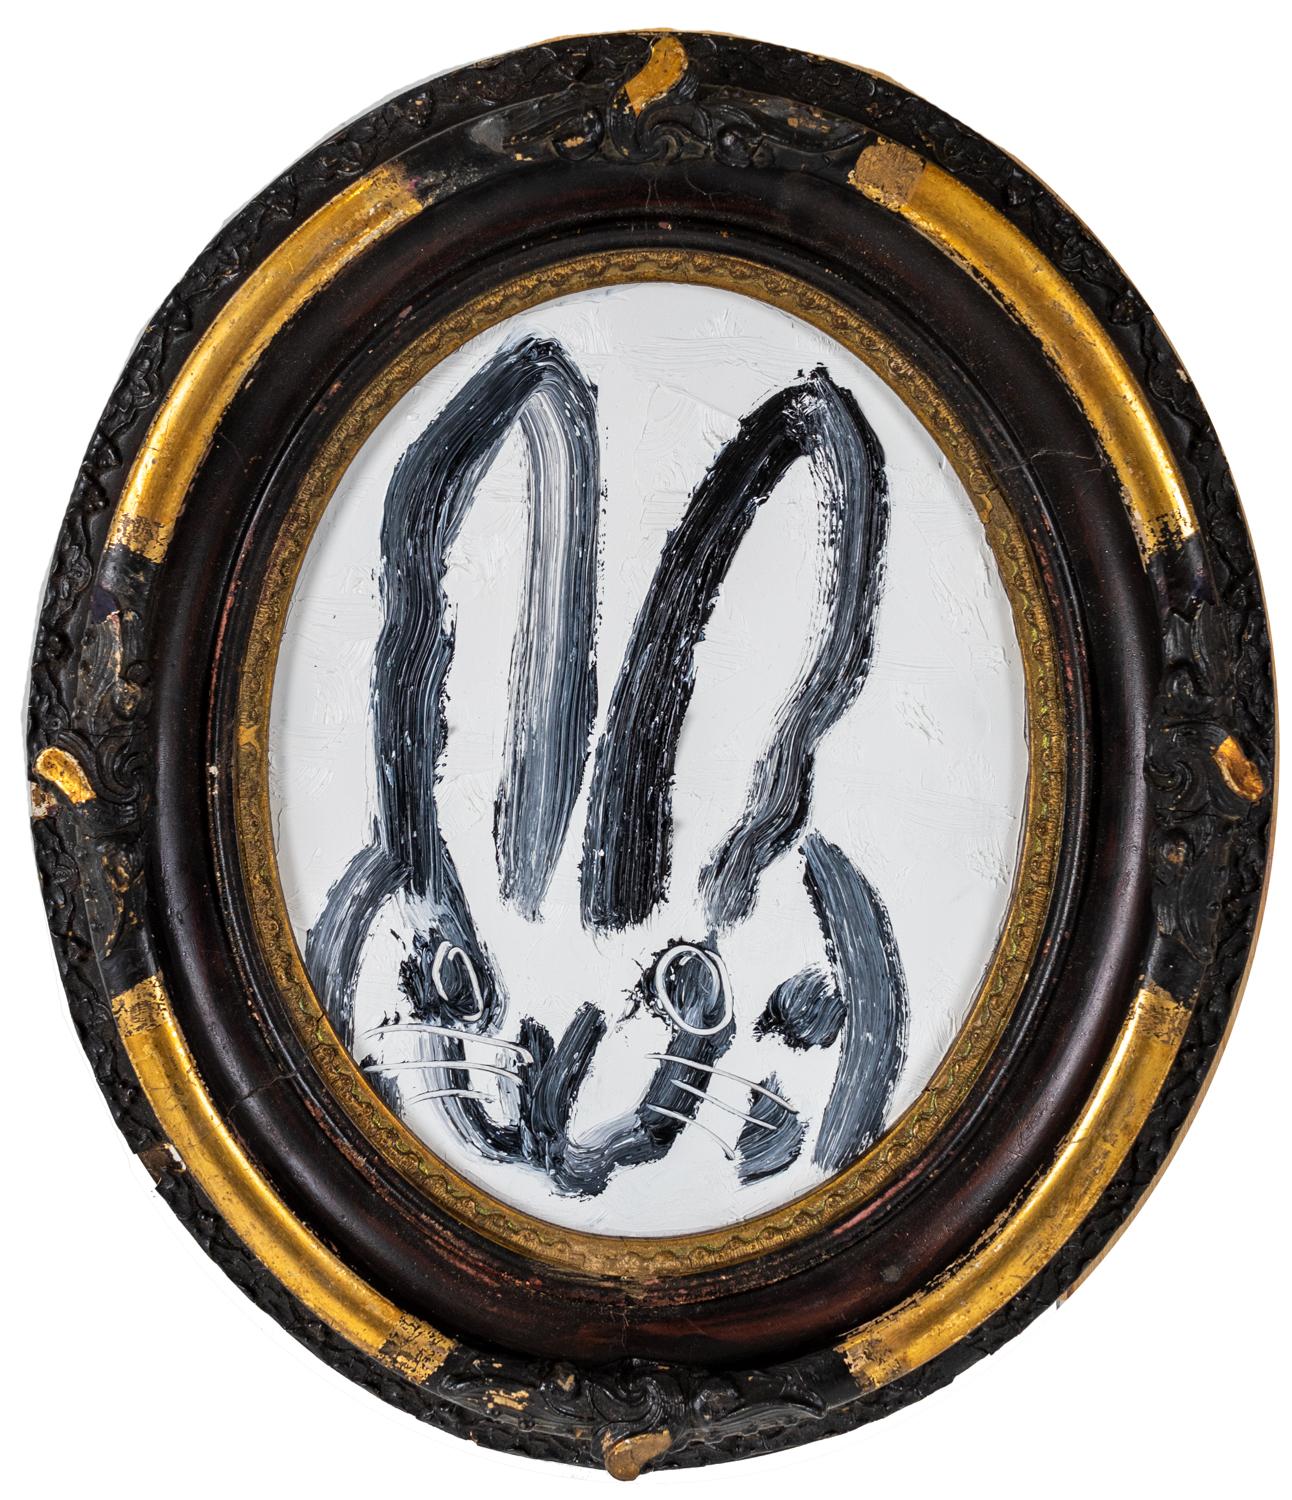 Hunt Slonem "Susanne" Spotted Bunny
Black outlined spotted bunny on a white background in an antique oval frame

Unframed: 10 x 8 inches  
Framed: 15 x 12.5 inches
*Painting is framed - Please note that not all Hunt Slonem frames are not in mint